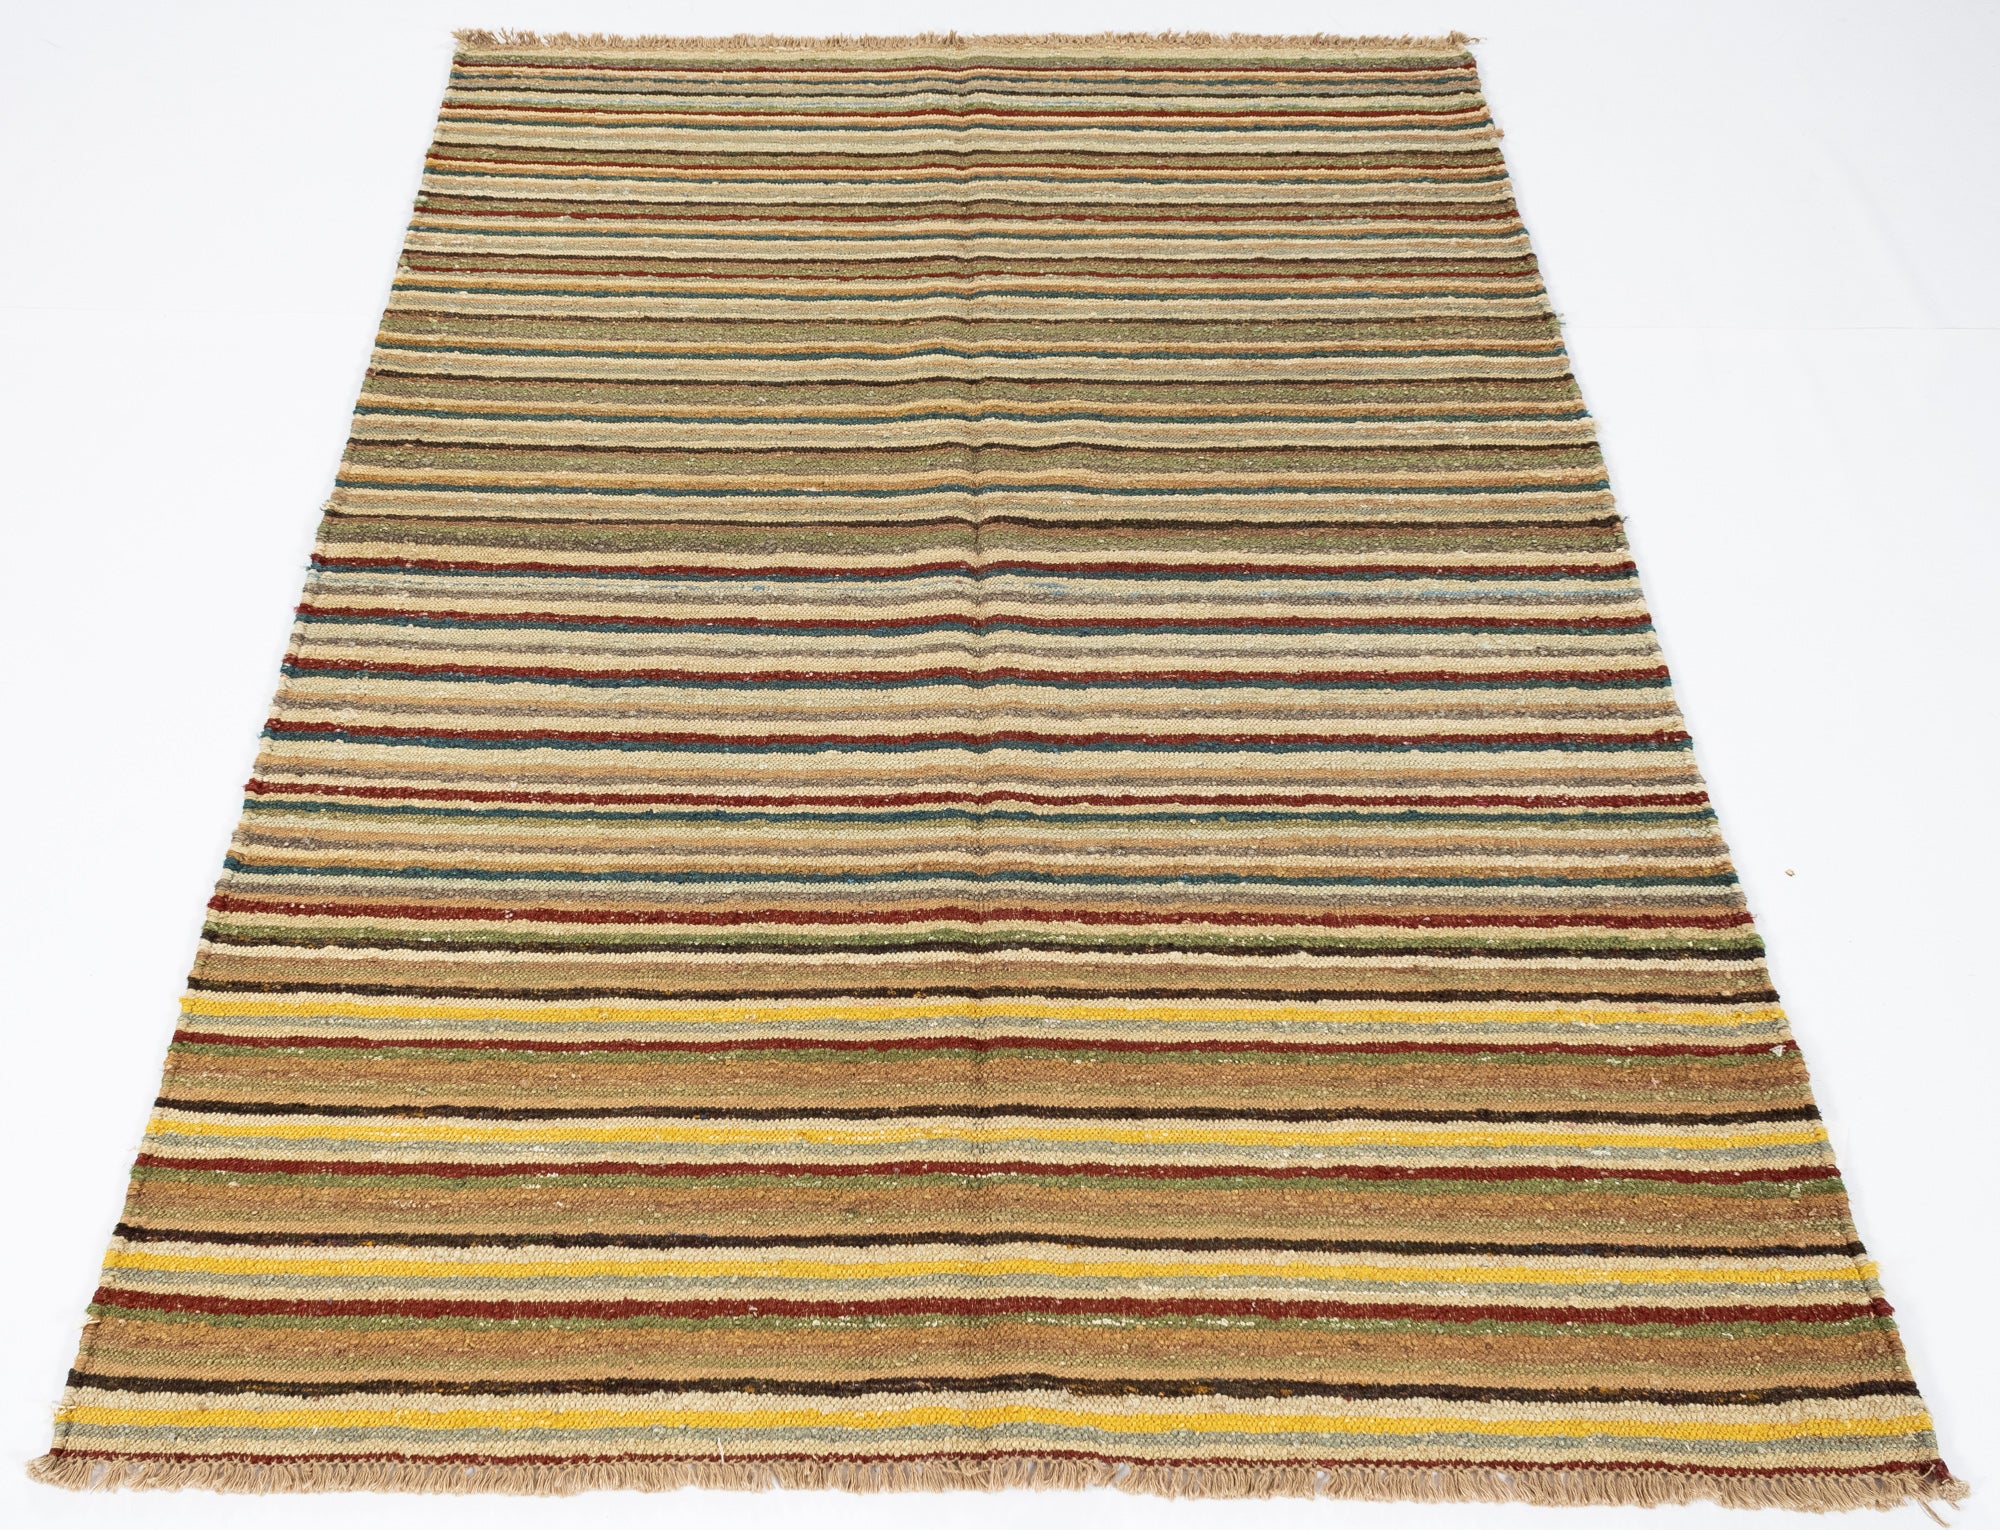 New Indian Contemporary Flatweave Rug <br> 4'0 x 5'11